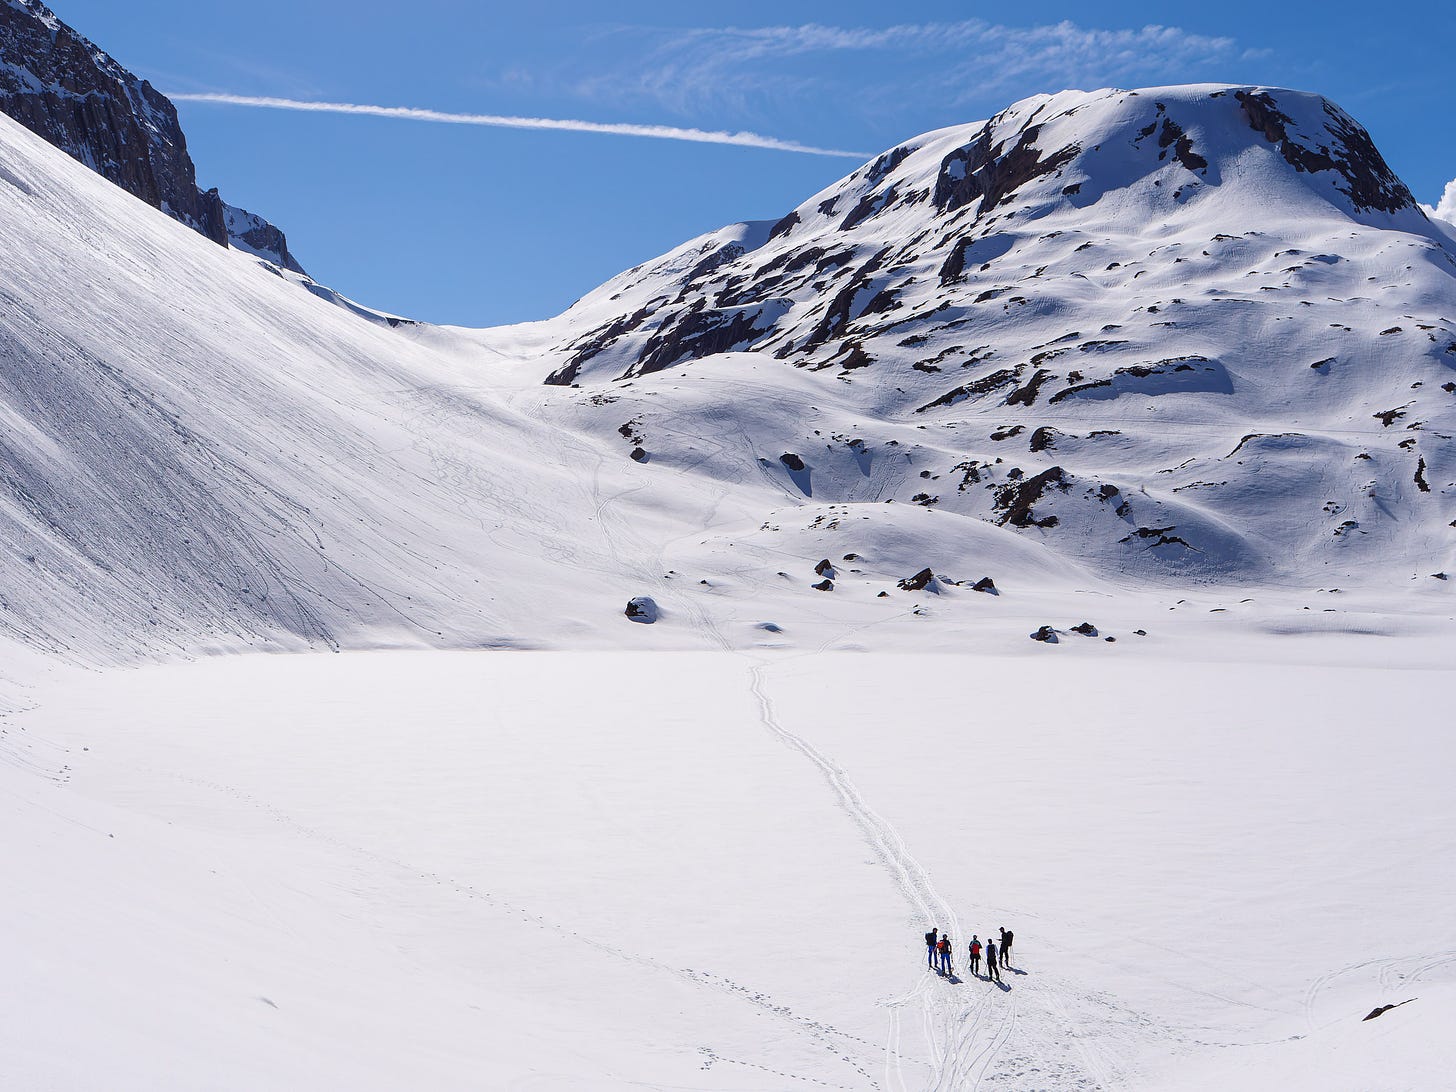 A group of ski tourers pausing to regroup while crossing a frozen mountain lake.